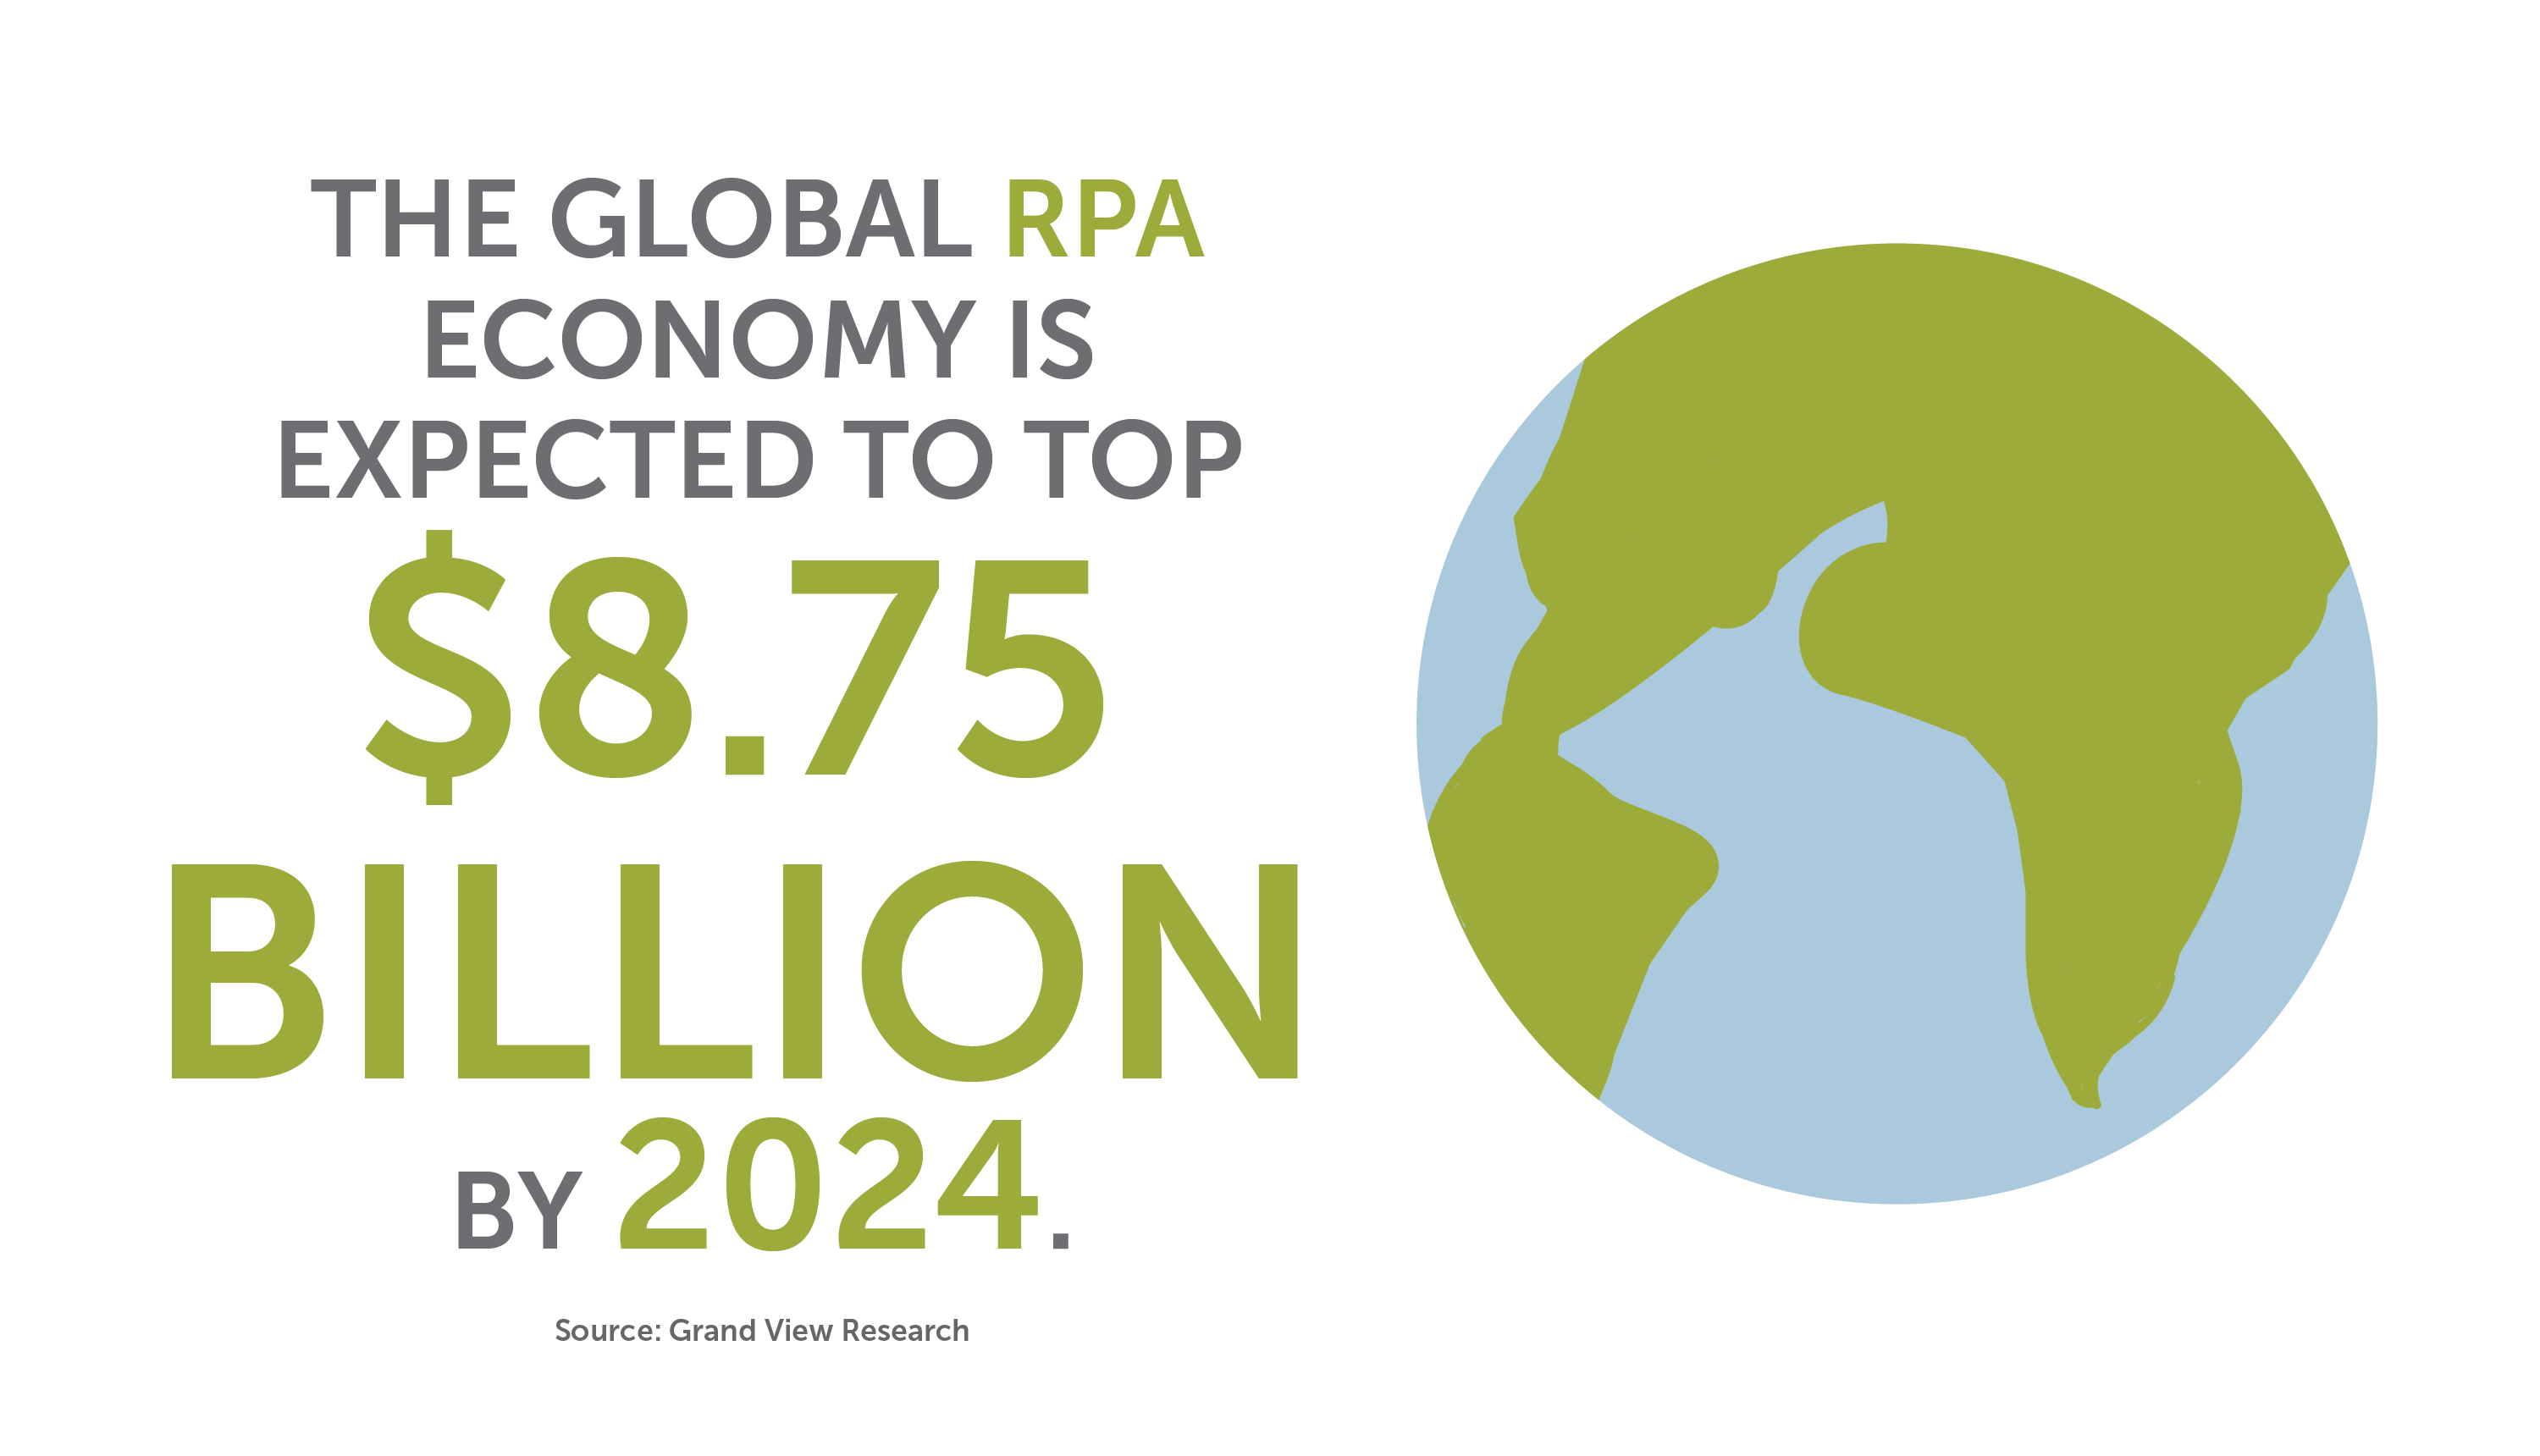 The global RPA economy is expected to top $8.75 billion by 2024, according to Grand View Research.